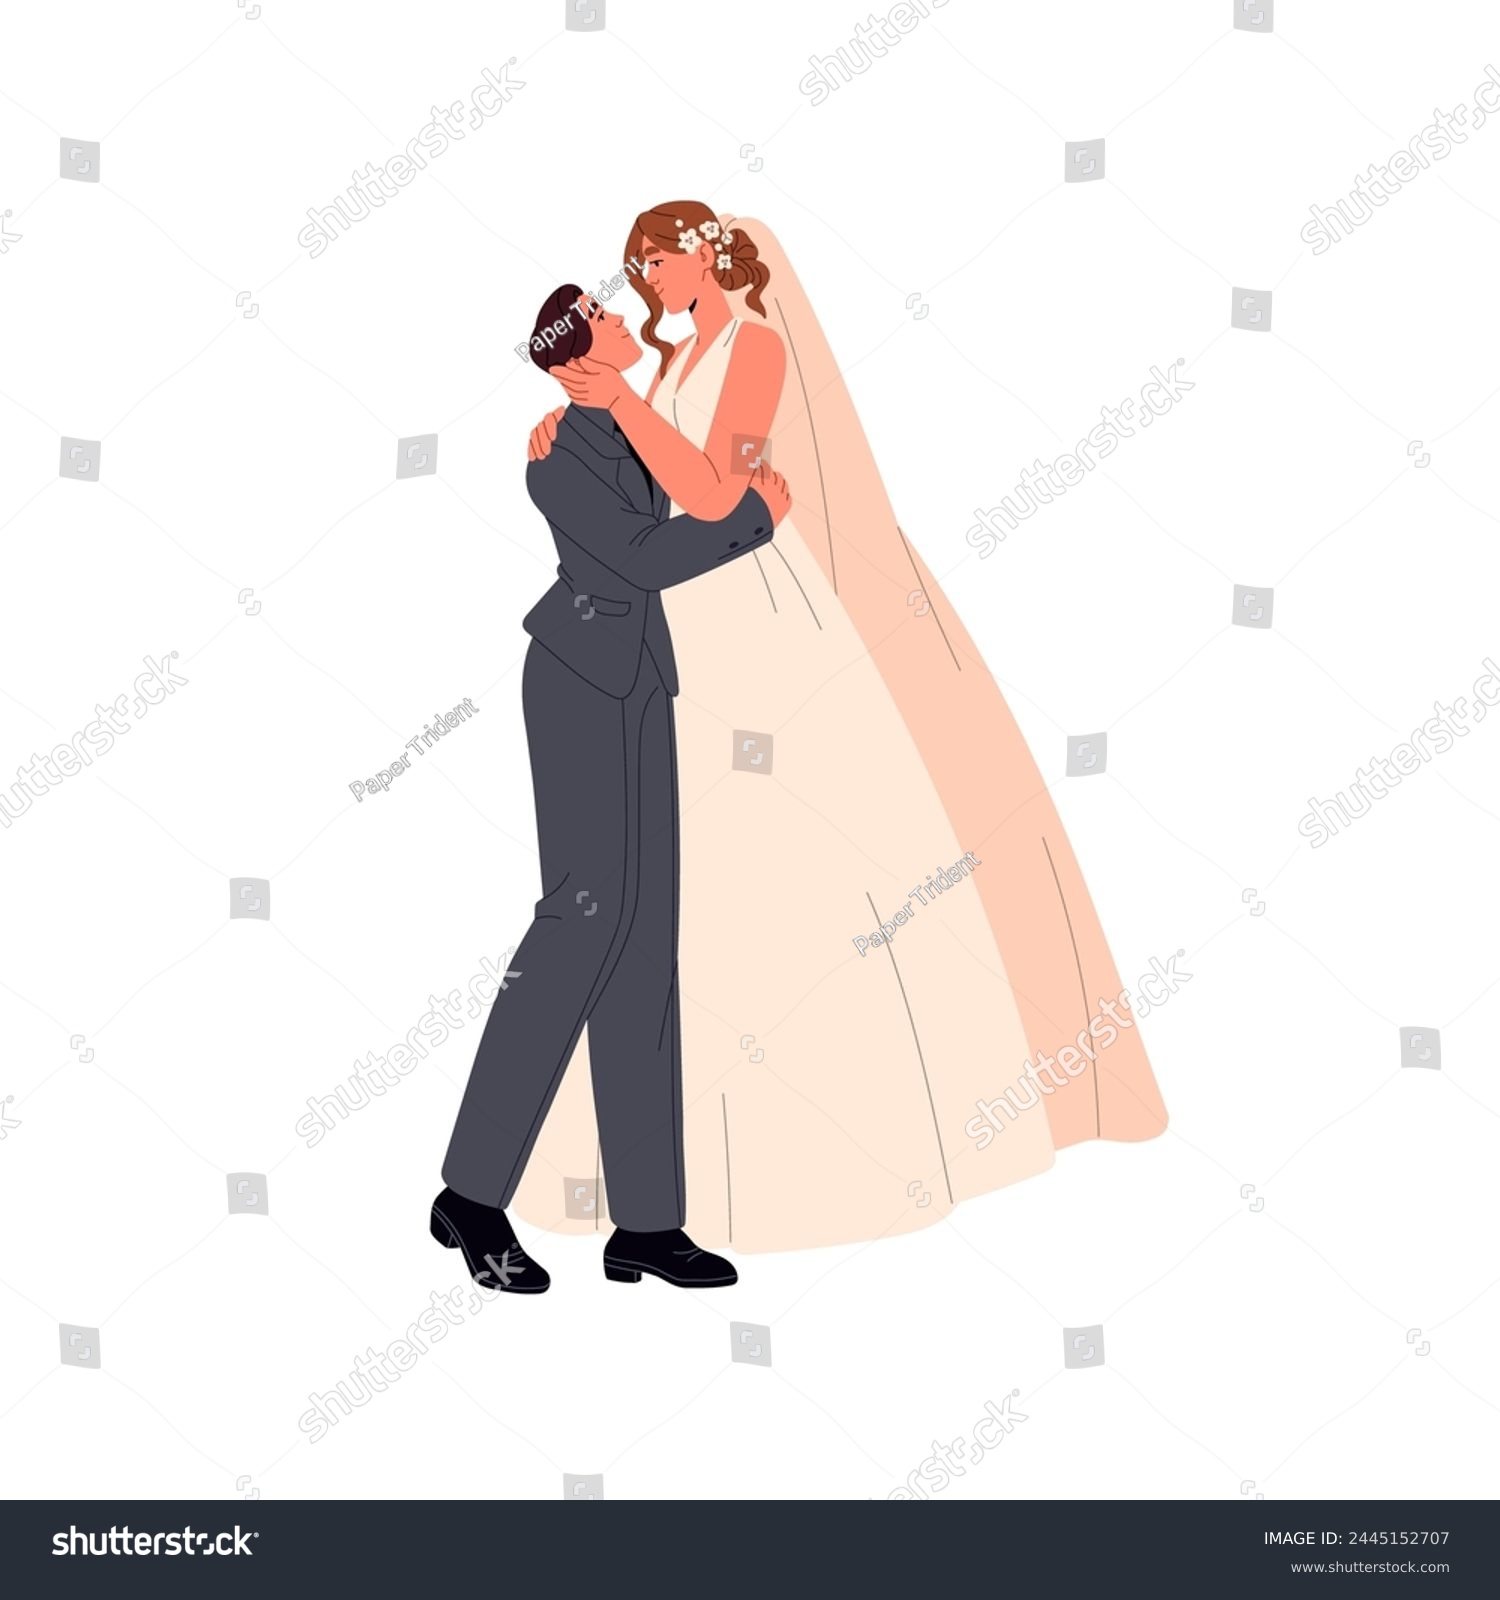 SVG of Groom holds bride in bridal dress with veil in his hands. Couple wedding. Newlywed family expression tenderness, love. Marriage celebration. Flat isolated vector illustration on white background svg